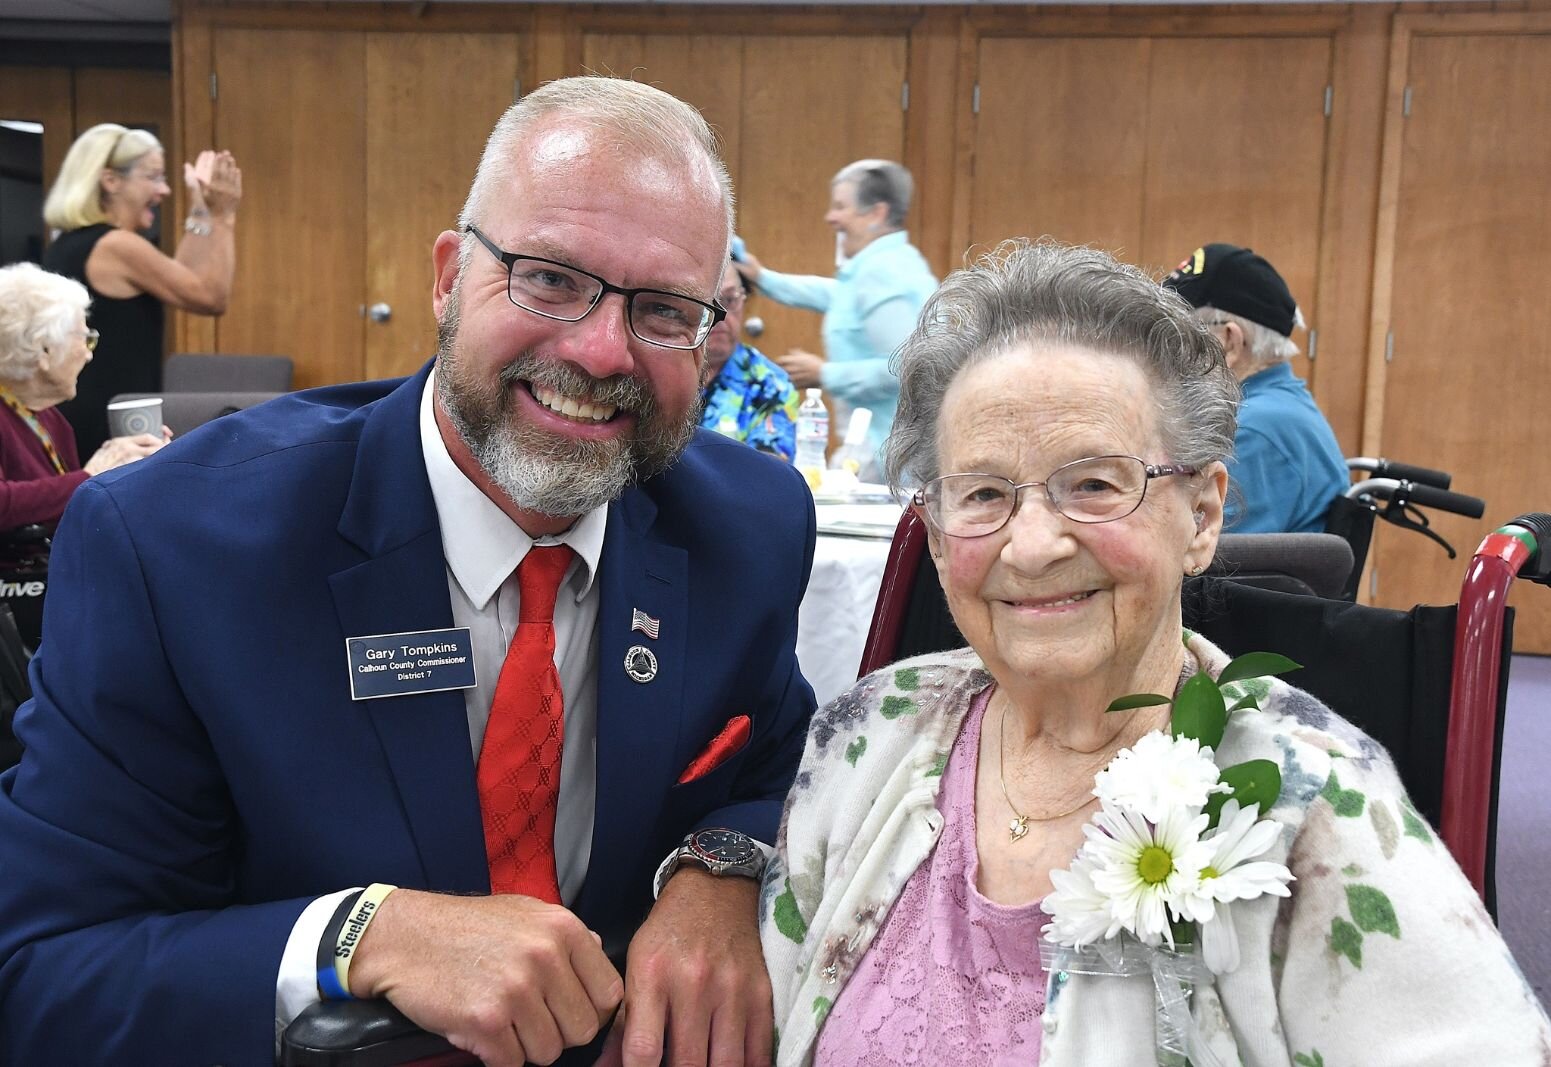 Gary Tompkins, Calhoun County Board member, poses for a photo with Stella Ingraham, 101, of Homer.